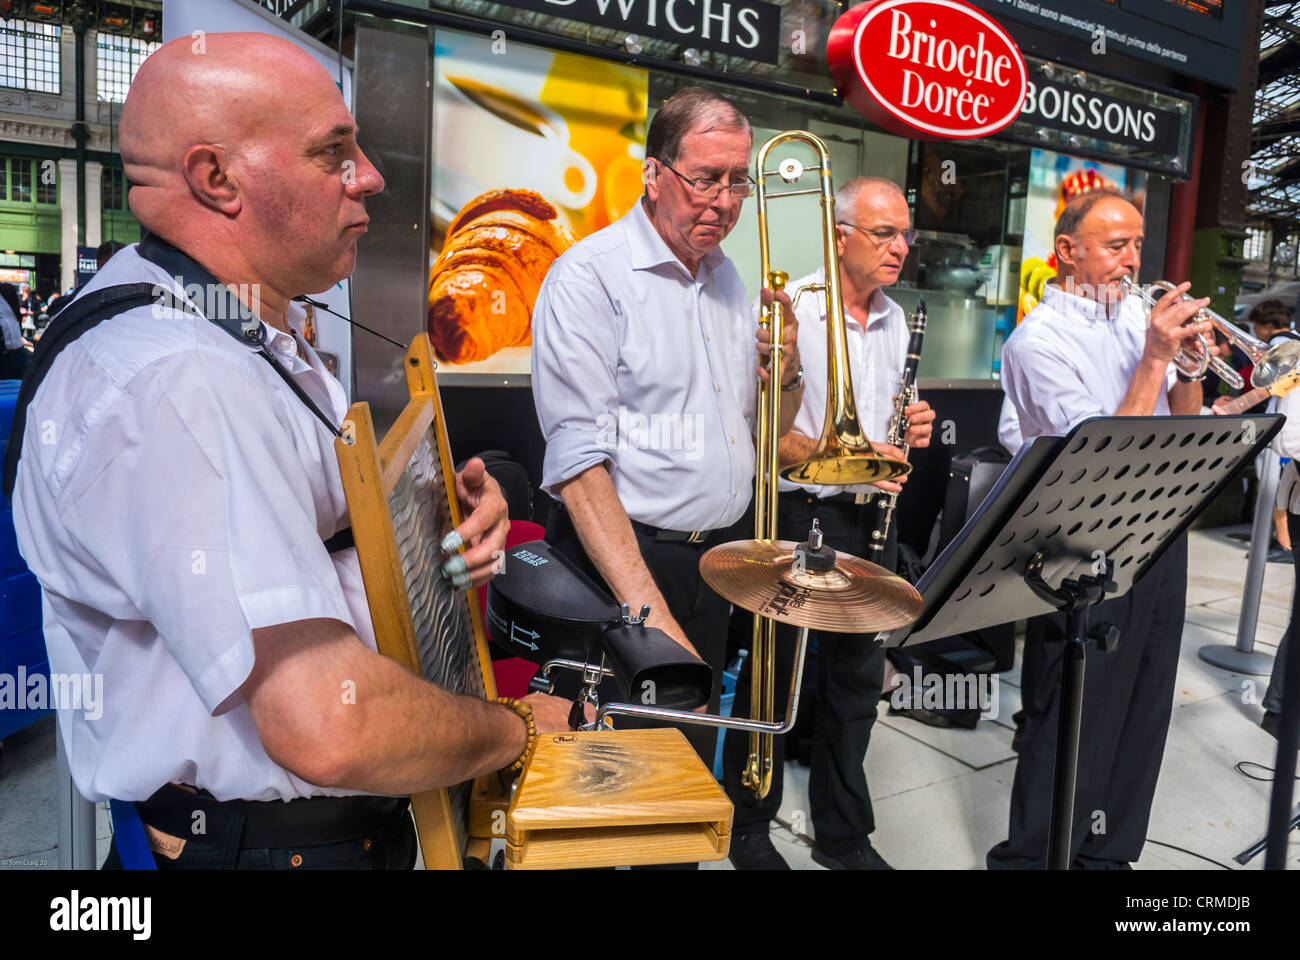 Paris, France, New Orleans Jazz Band, Orchestra Performing, Train Station, National Music Day, 'Fete de la Musique', American Jazz Music Concert, Musicians make music together, seniors grown up, Spring Jazz Band Stock Photo